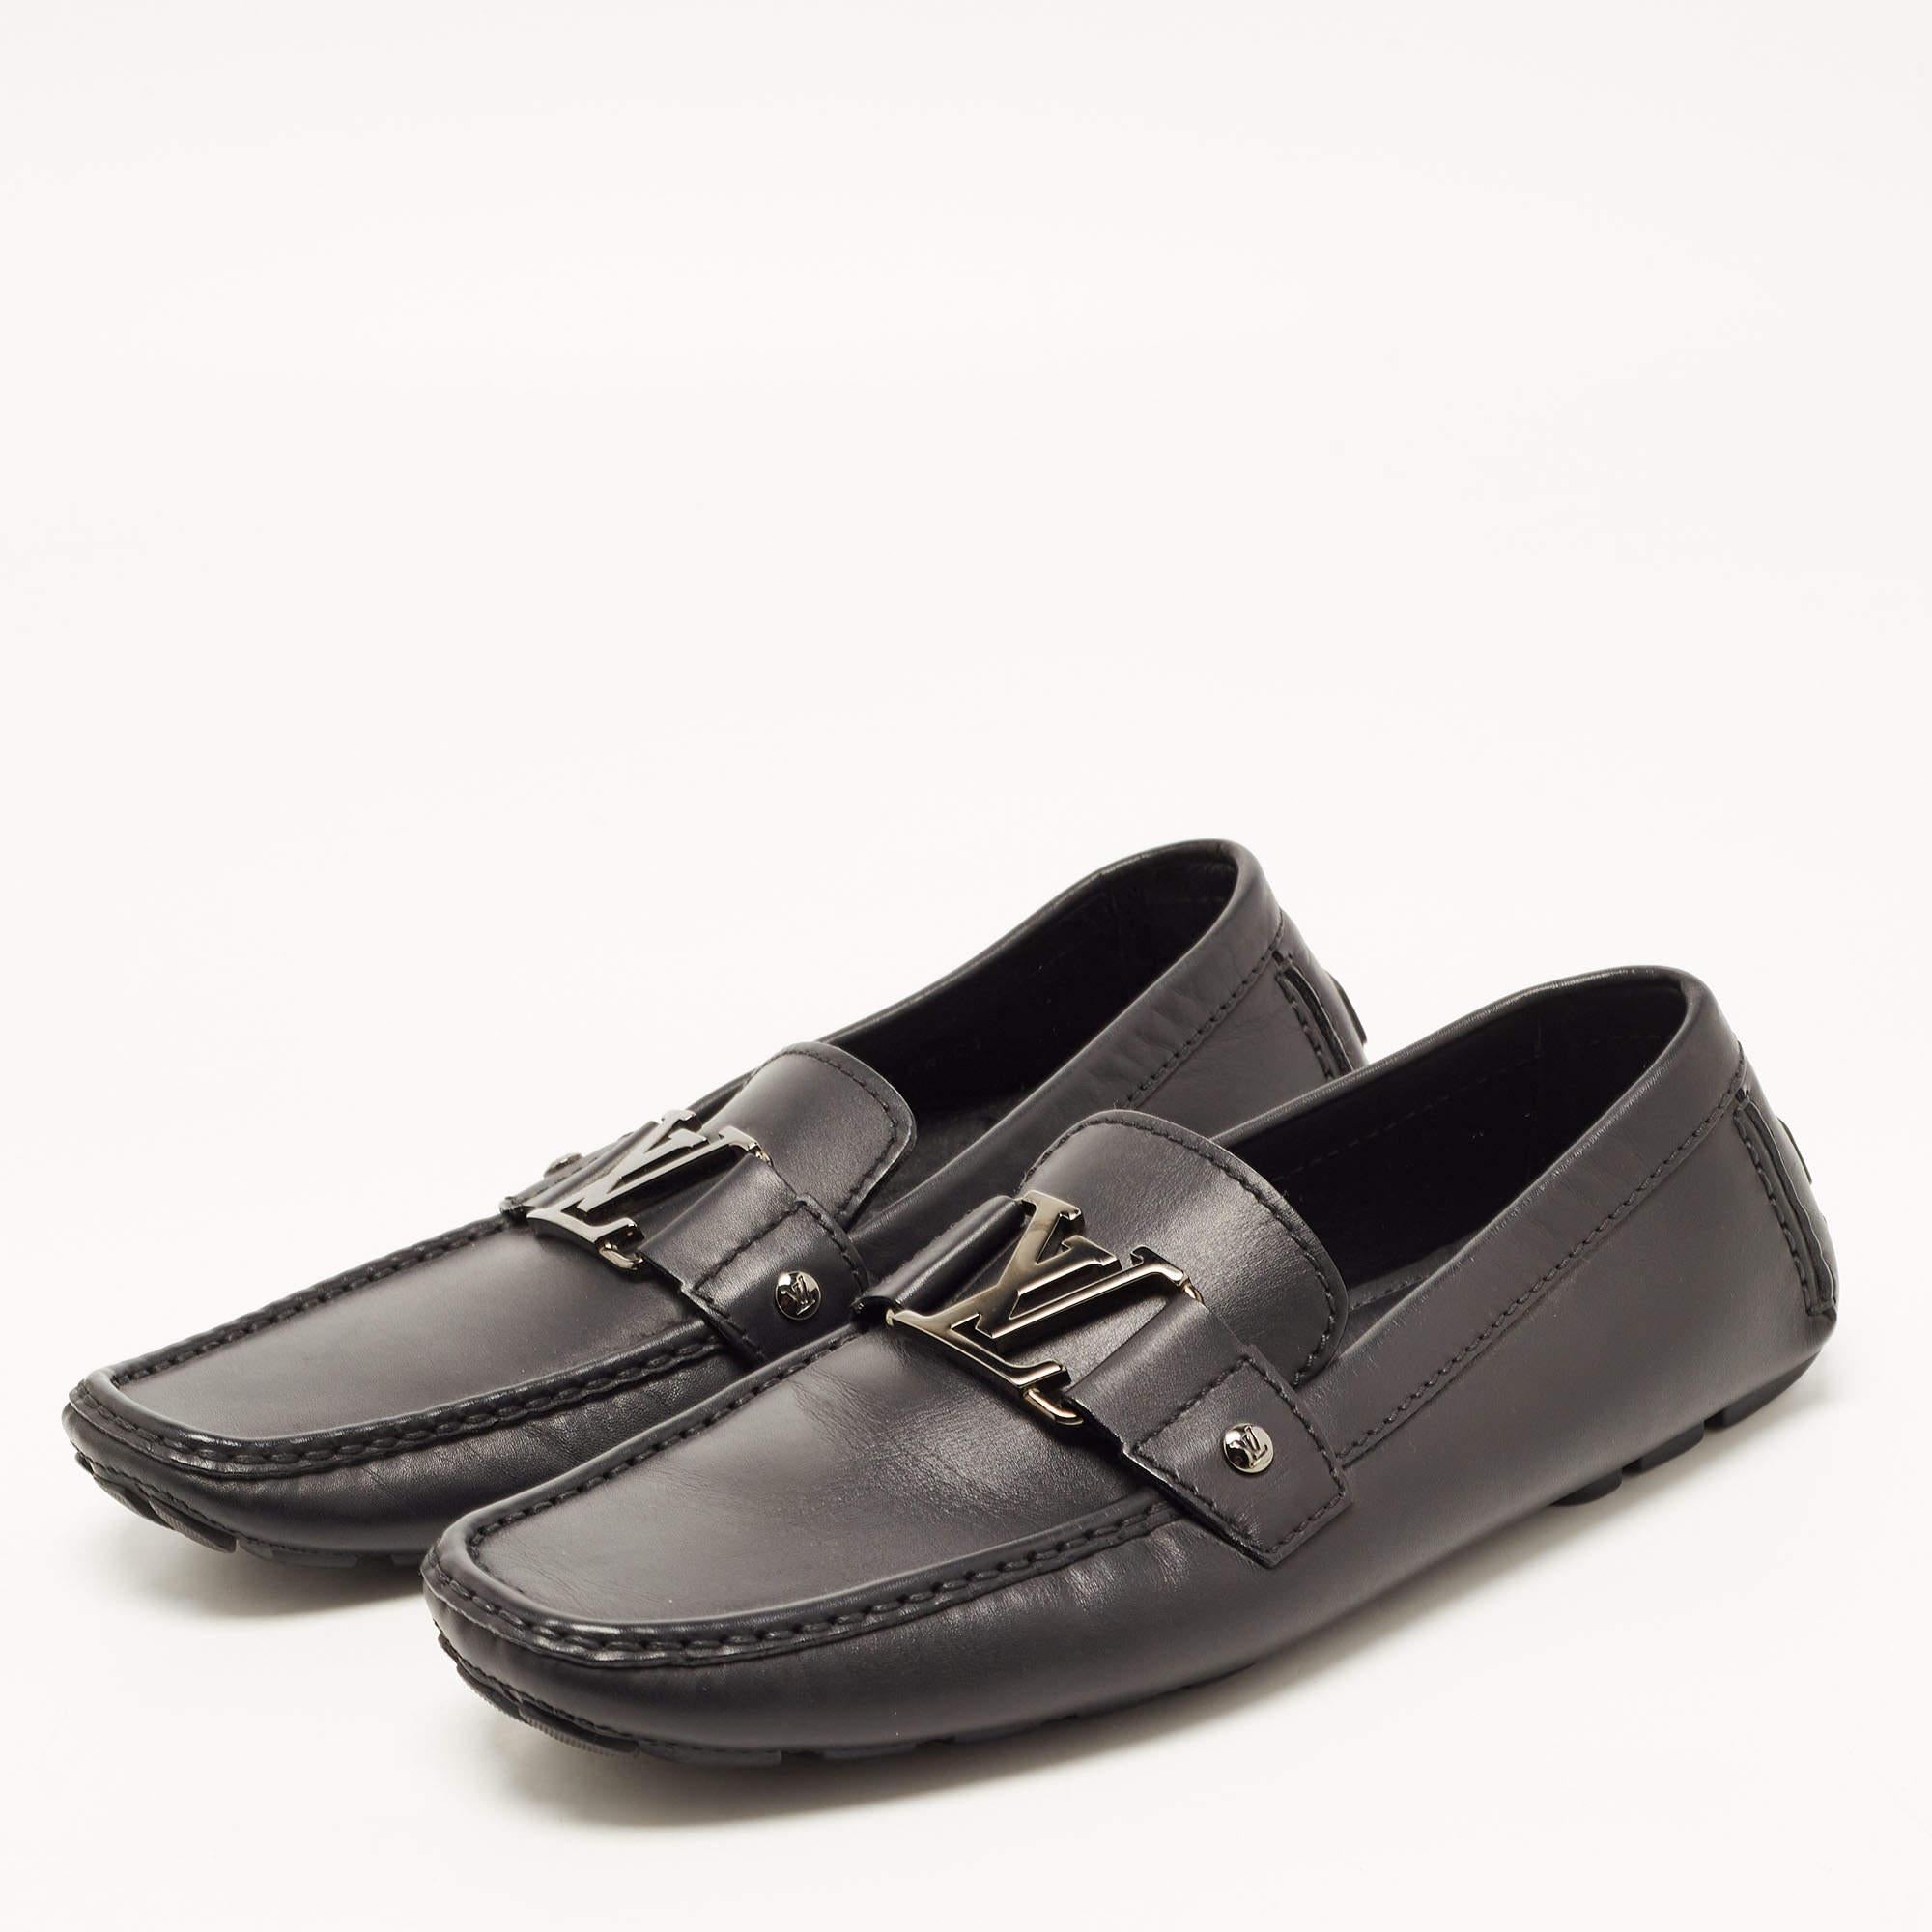 Practical, fashionable, and durable—these LV loafers are carefully built to be fine companions to your everyday style. They come made using the best materials to be a prized buy.

